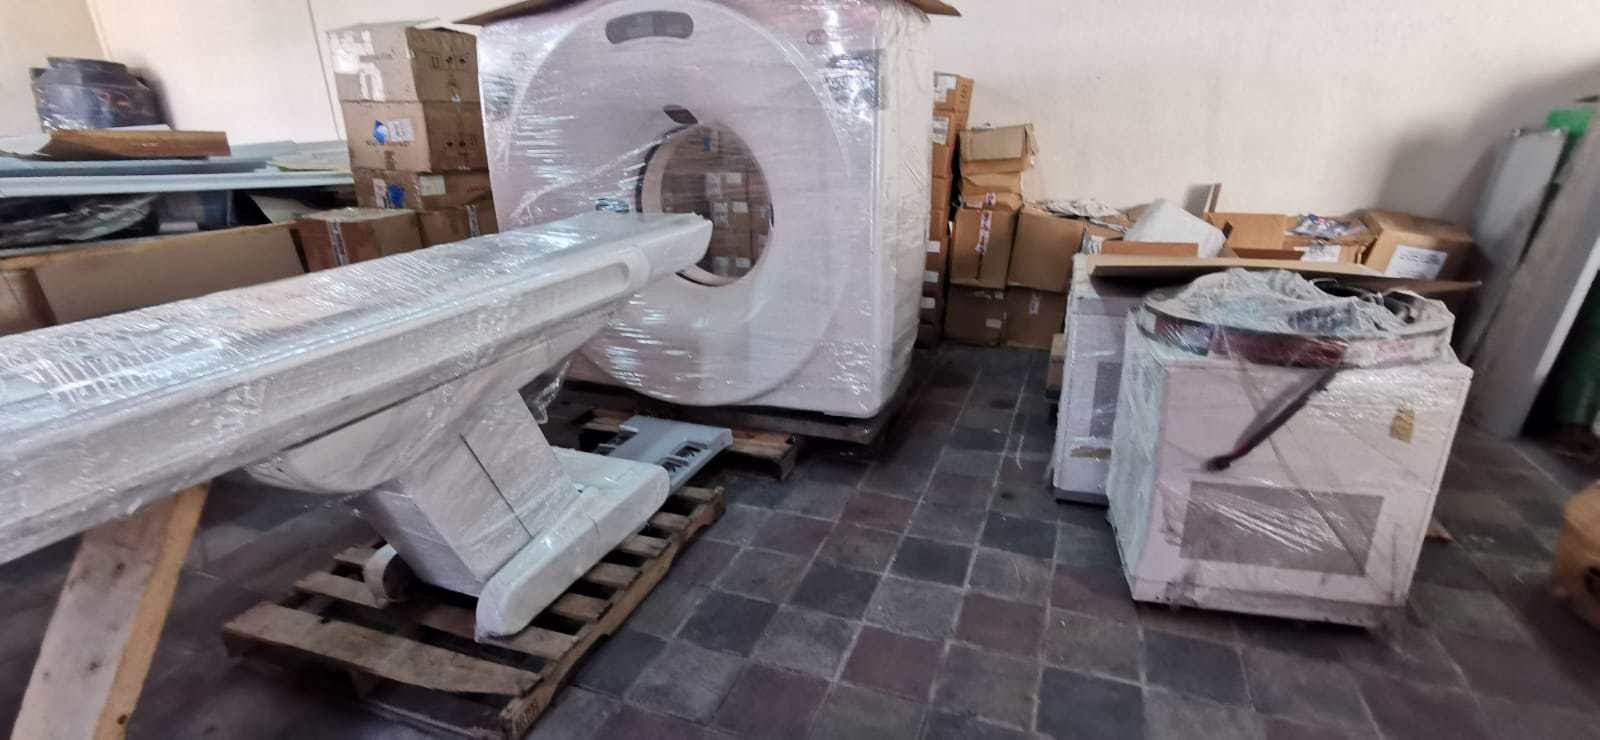 For Sale: Used CAT Scan In Mexico: GE Yokogawa Medica Systems